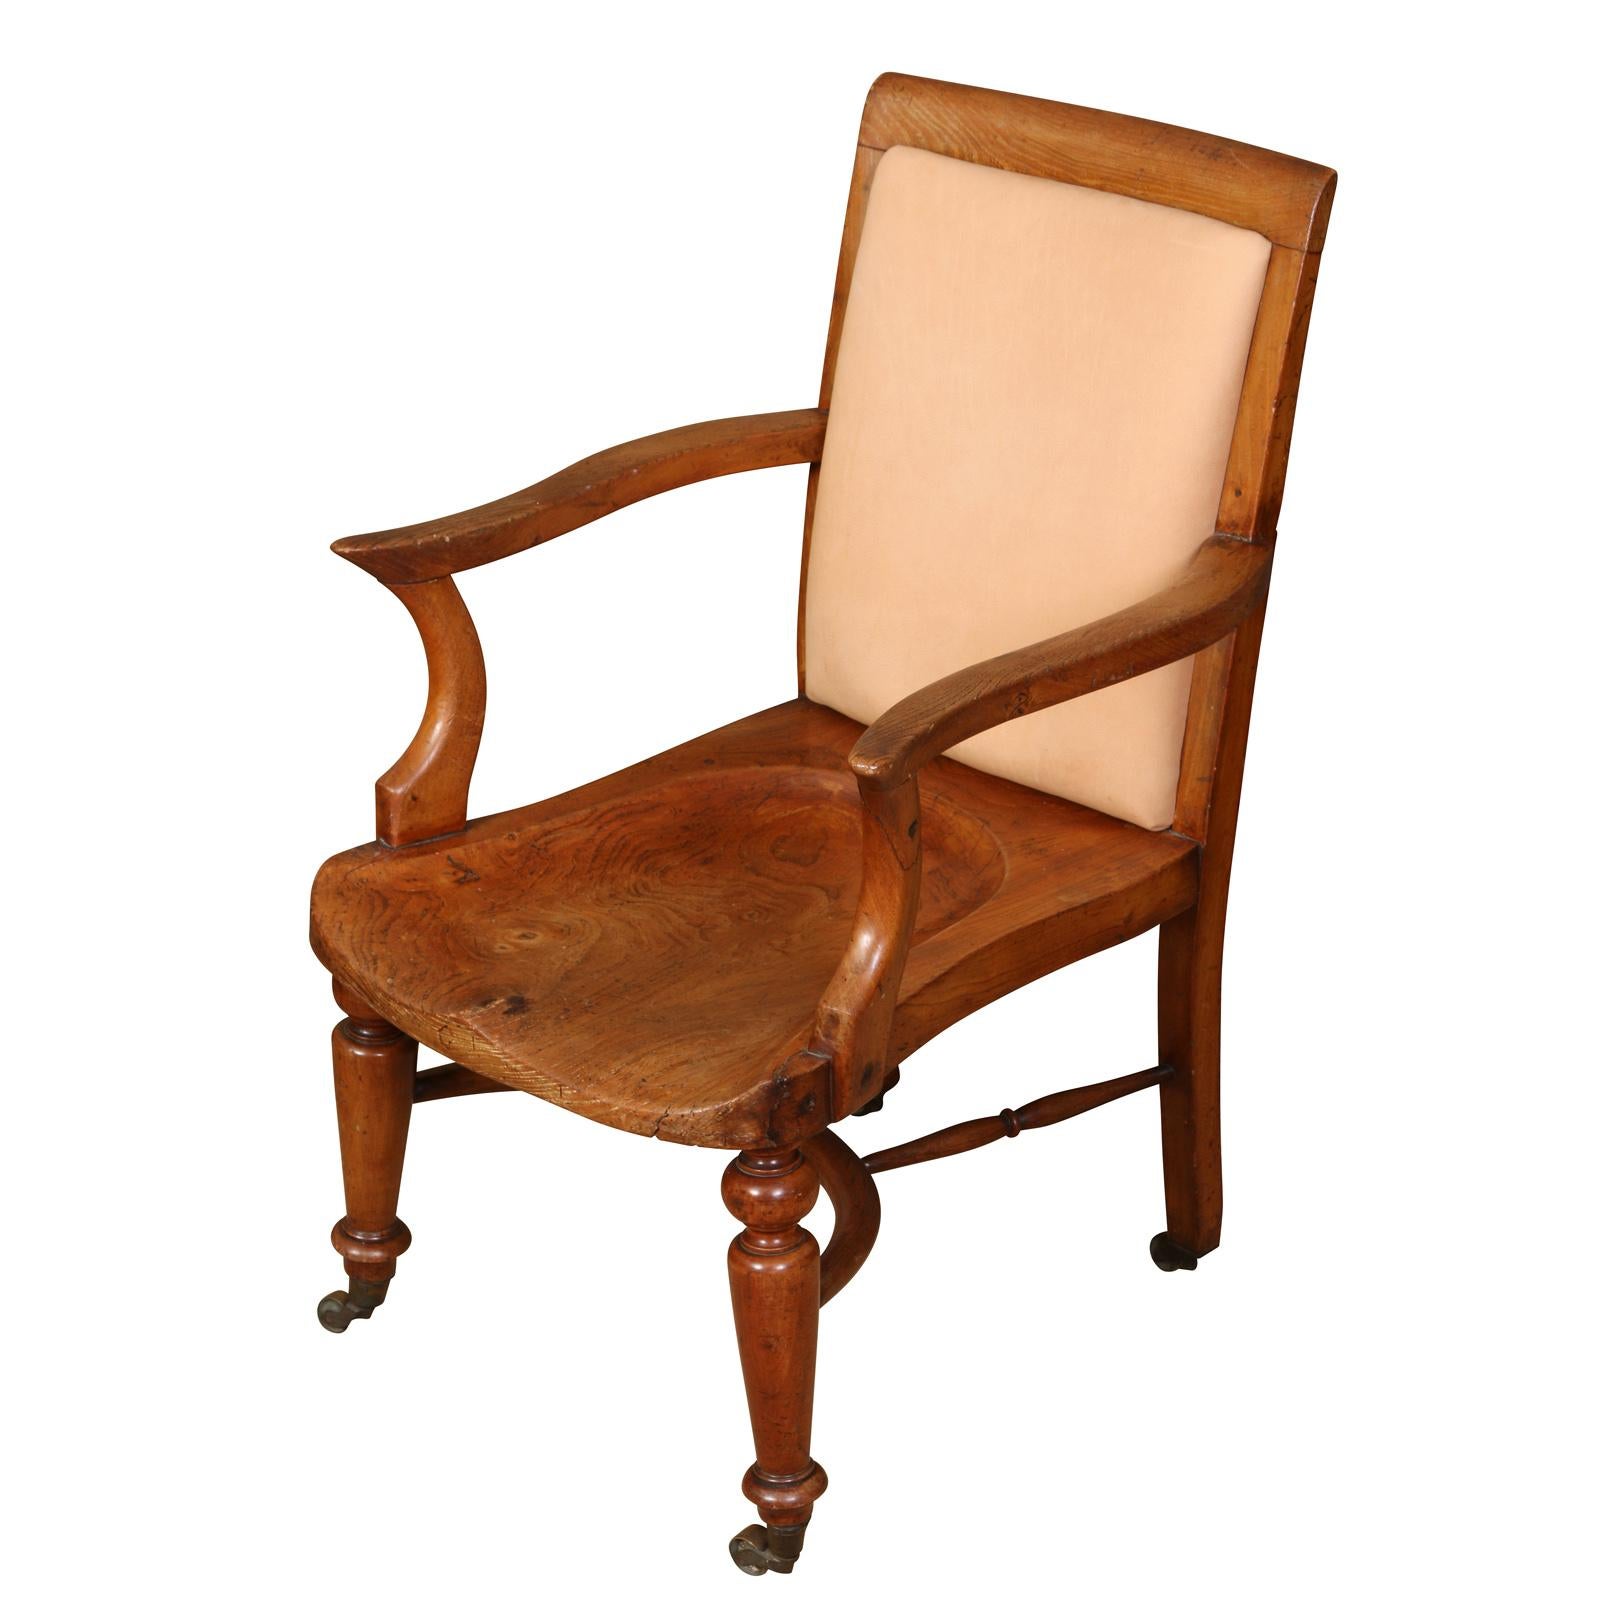 Vintage English Library Chair with Upholstered Leather Back and Casters In Good Condition For Sale In Locust Valley, NY